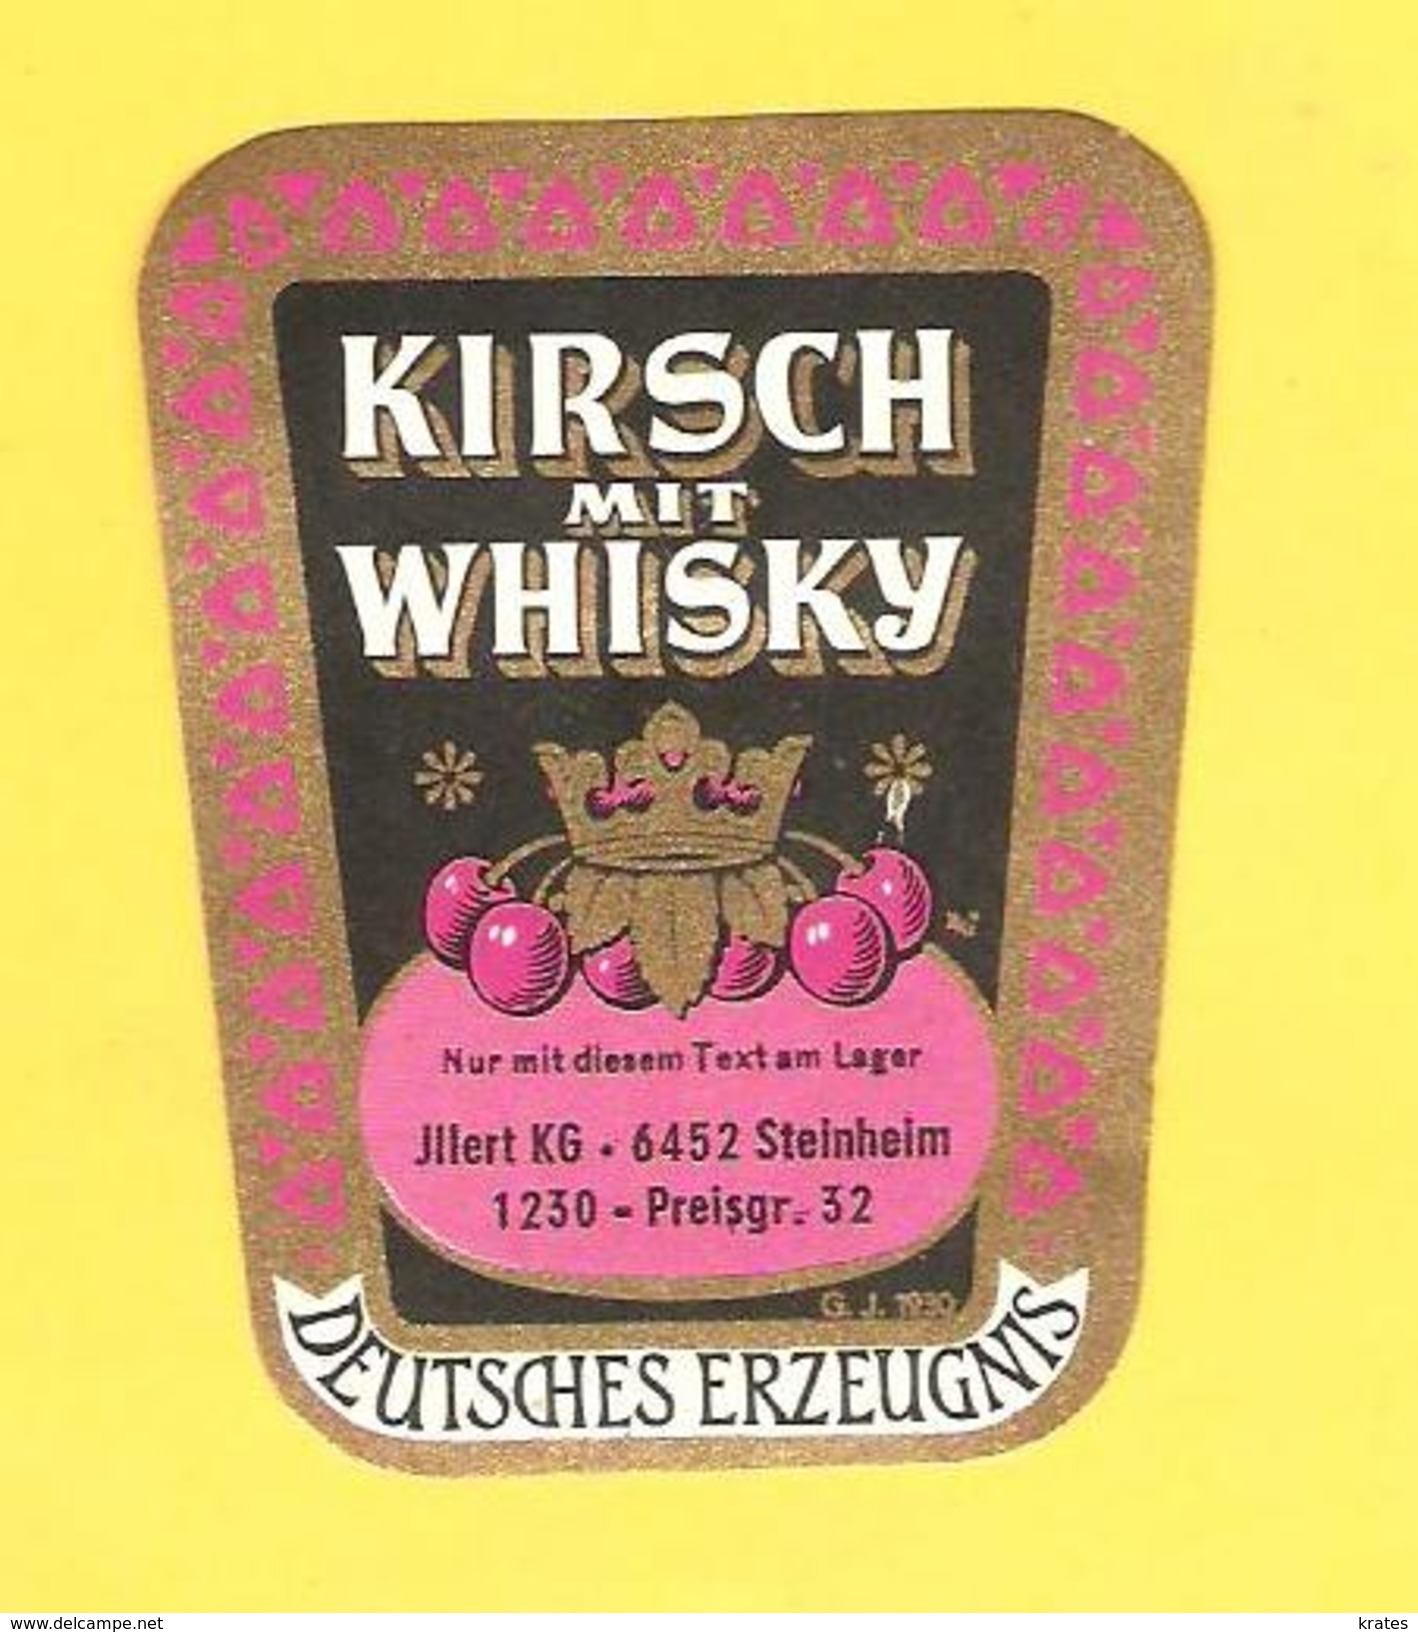 Old Whisky Label - Kirsch Mit Whisky - Whisky